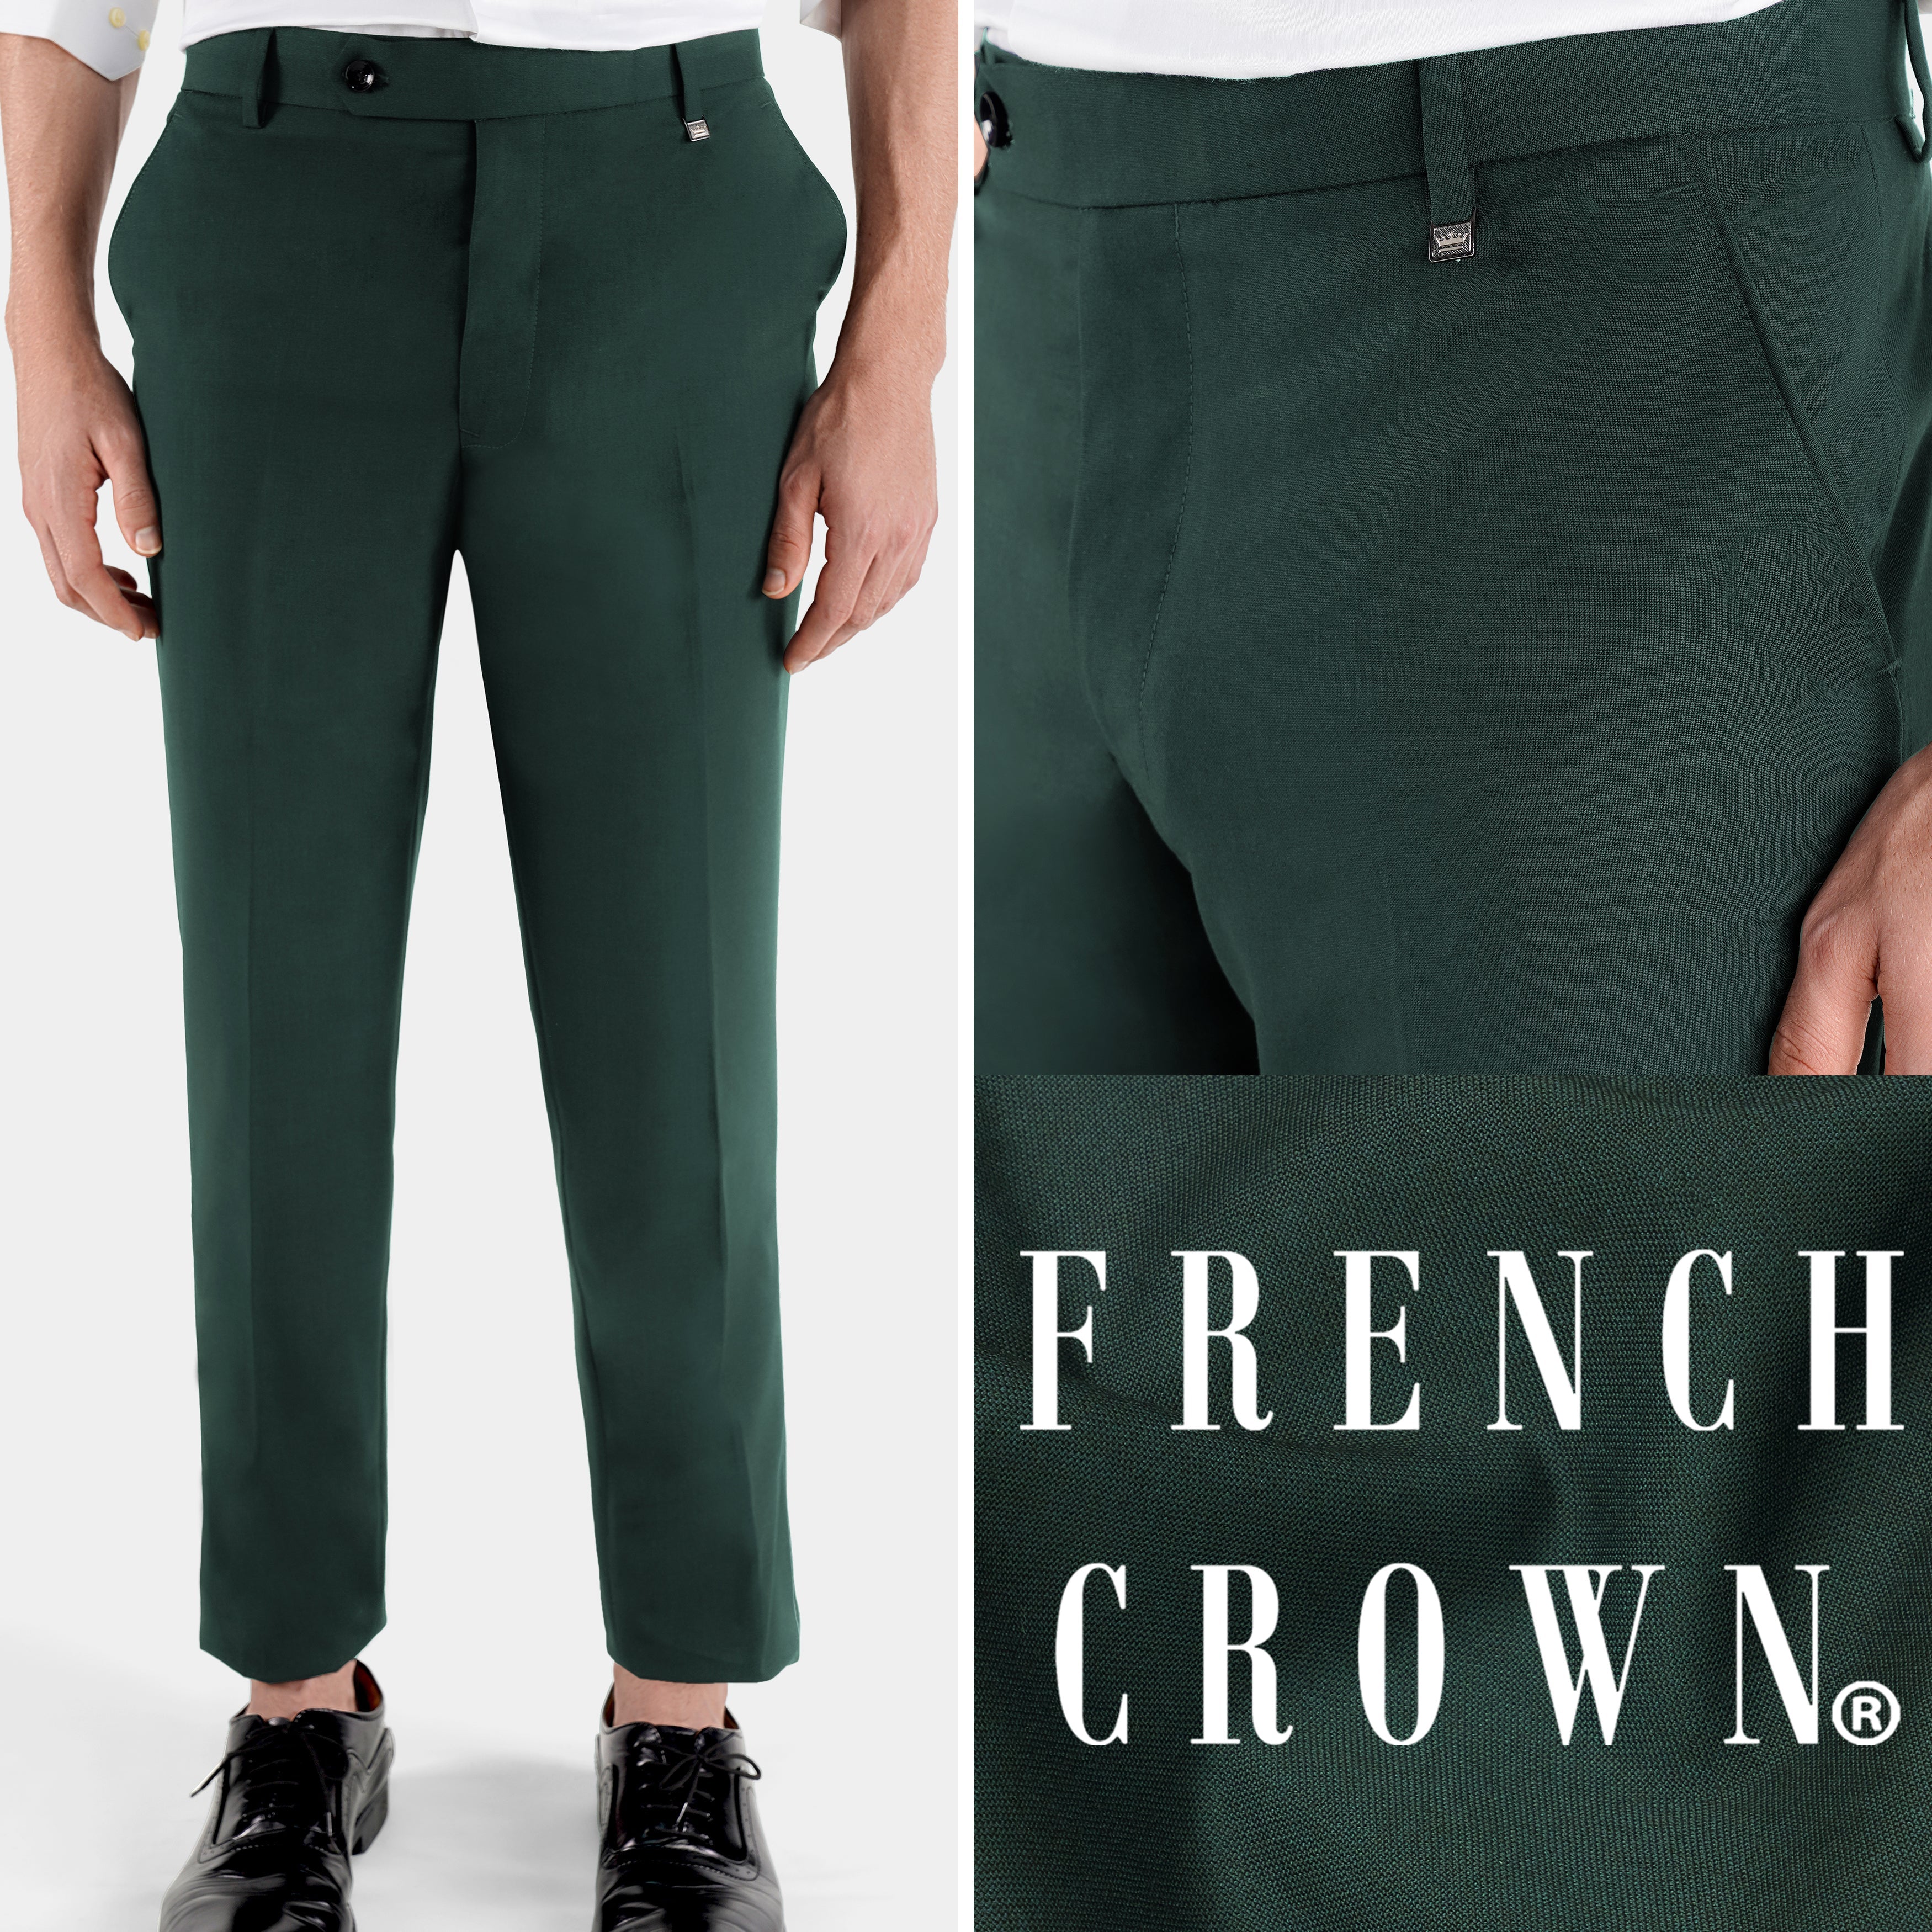 Naas Drape High Waist Straight Pants Trendy Green Office Formal Trousers  For Men For Men From Angorabest, $53.97 | DHgate.Com